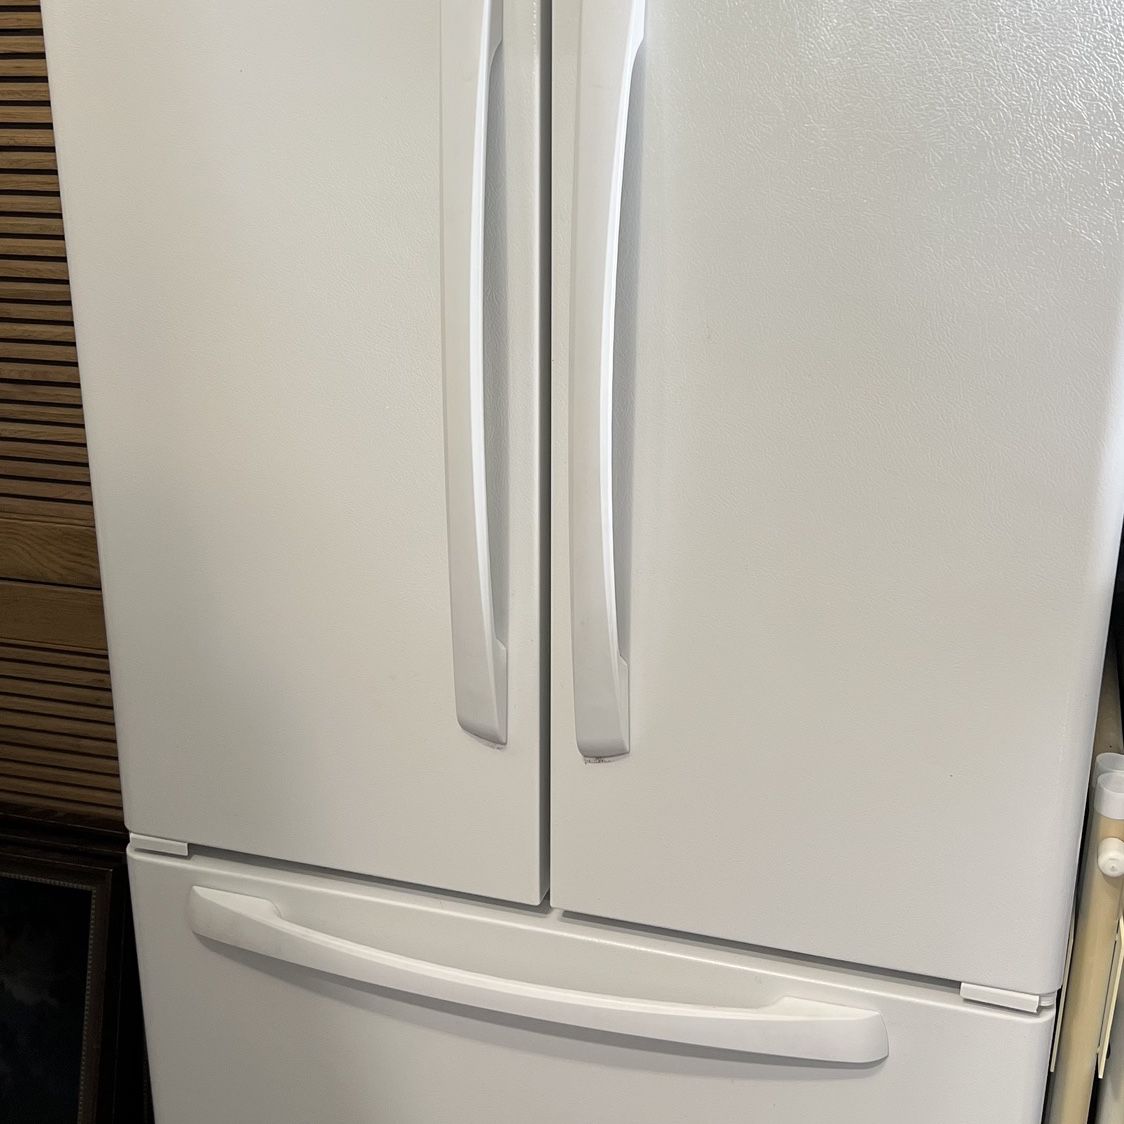 Amana White French Door Refrigerator From 2007